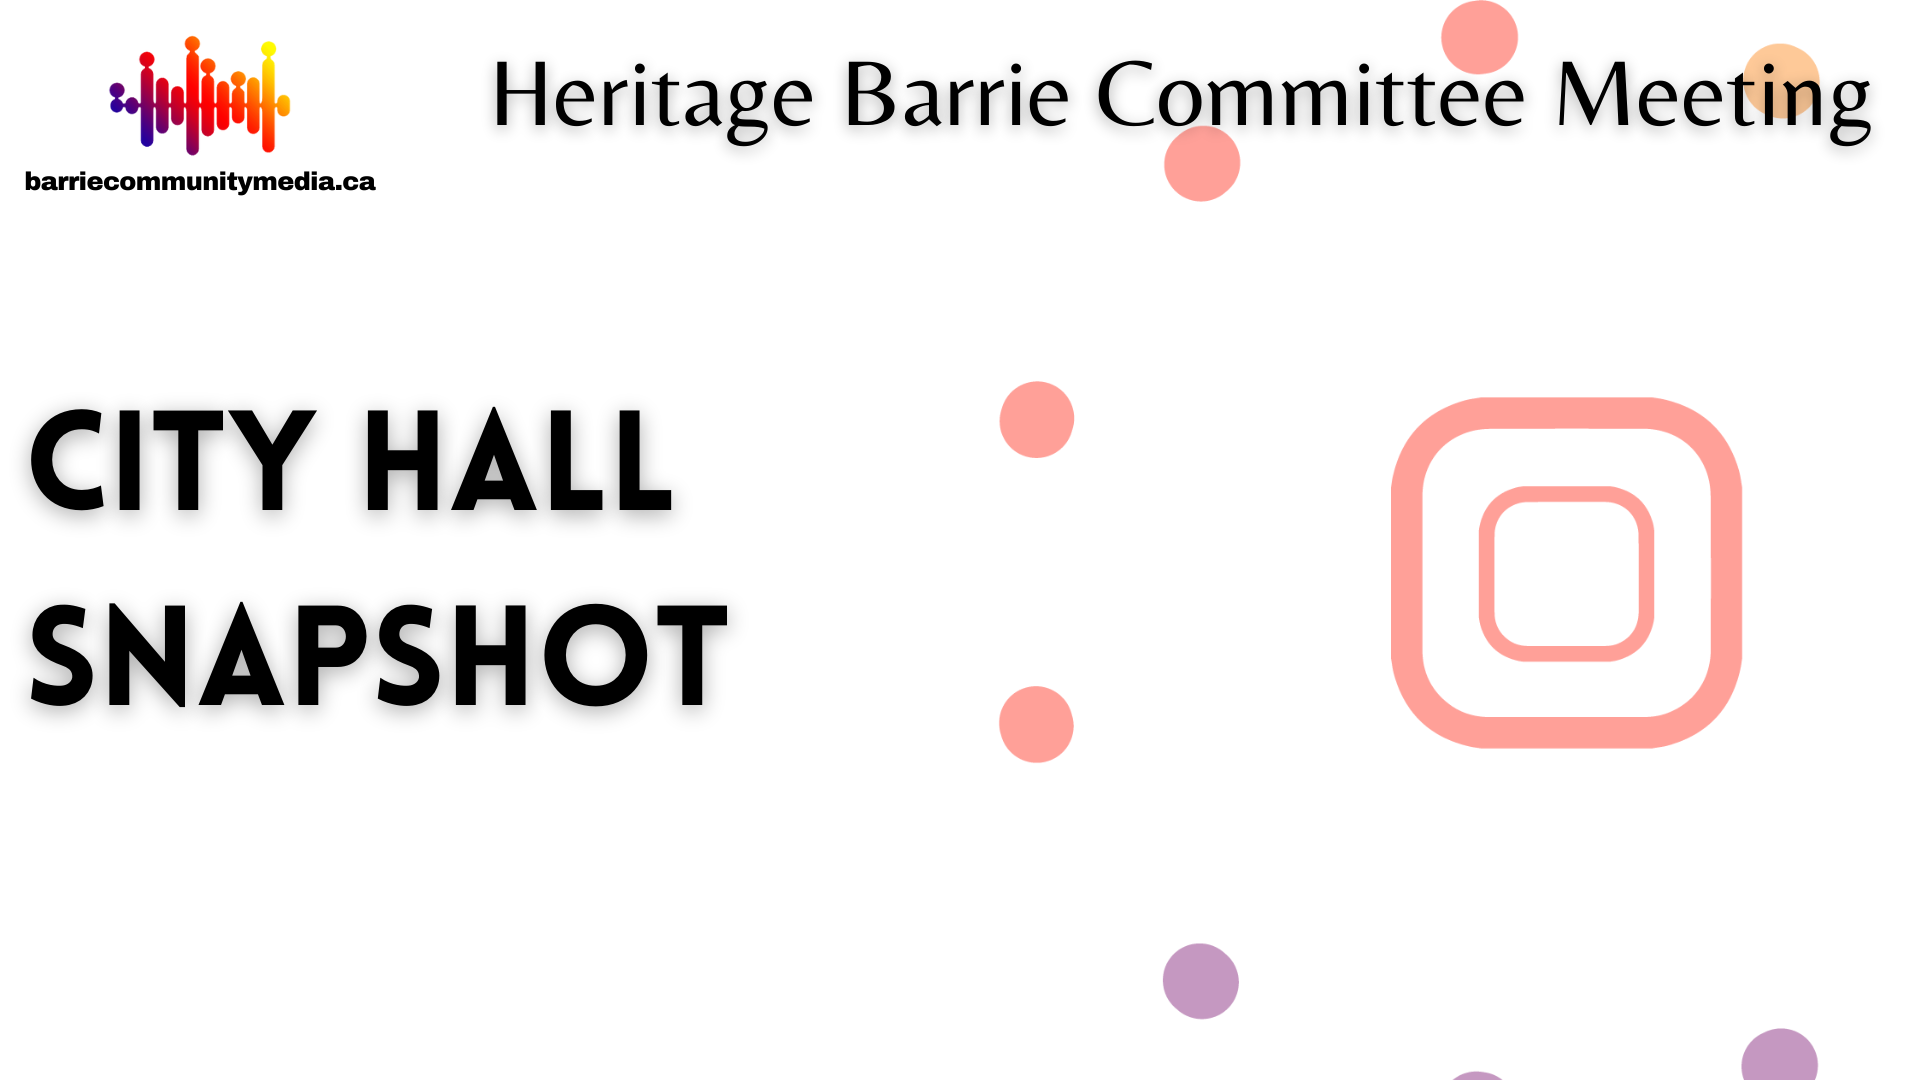 Celebrate Barrie’s Heritage: Apply for Heritage Awards